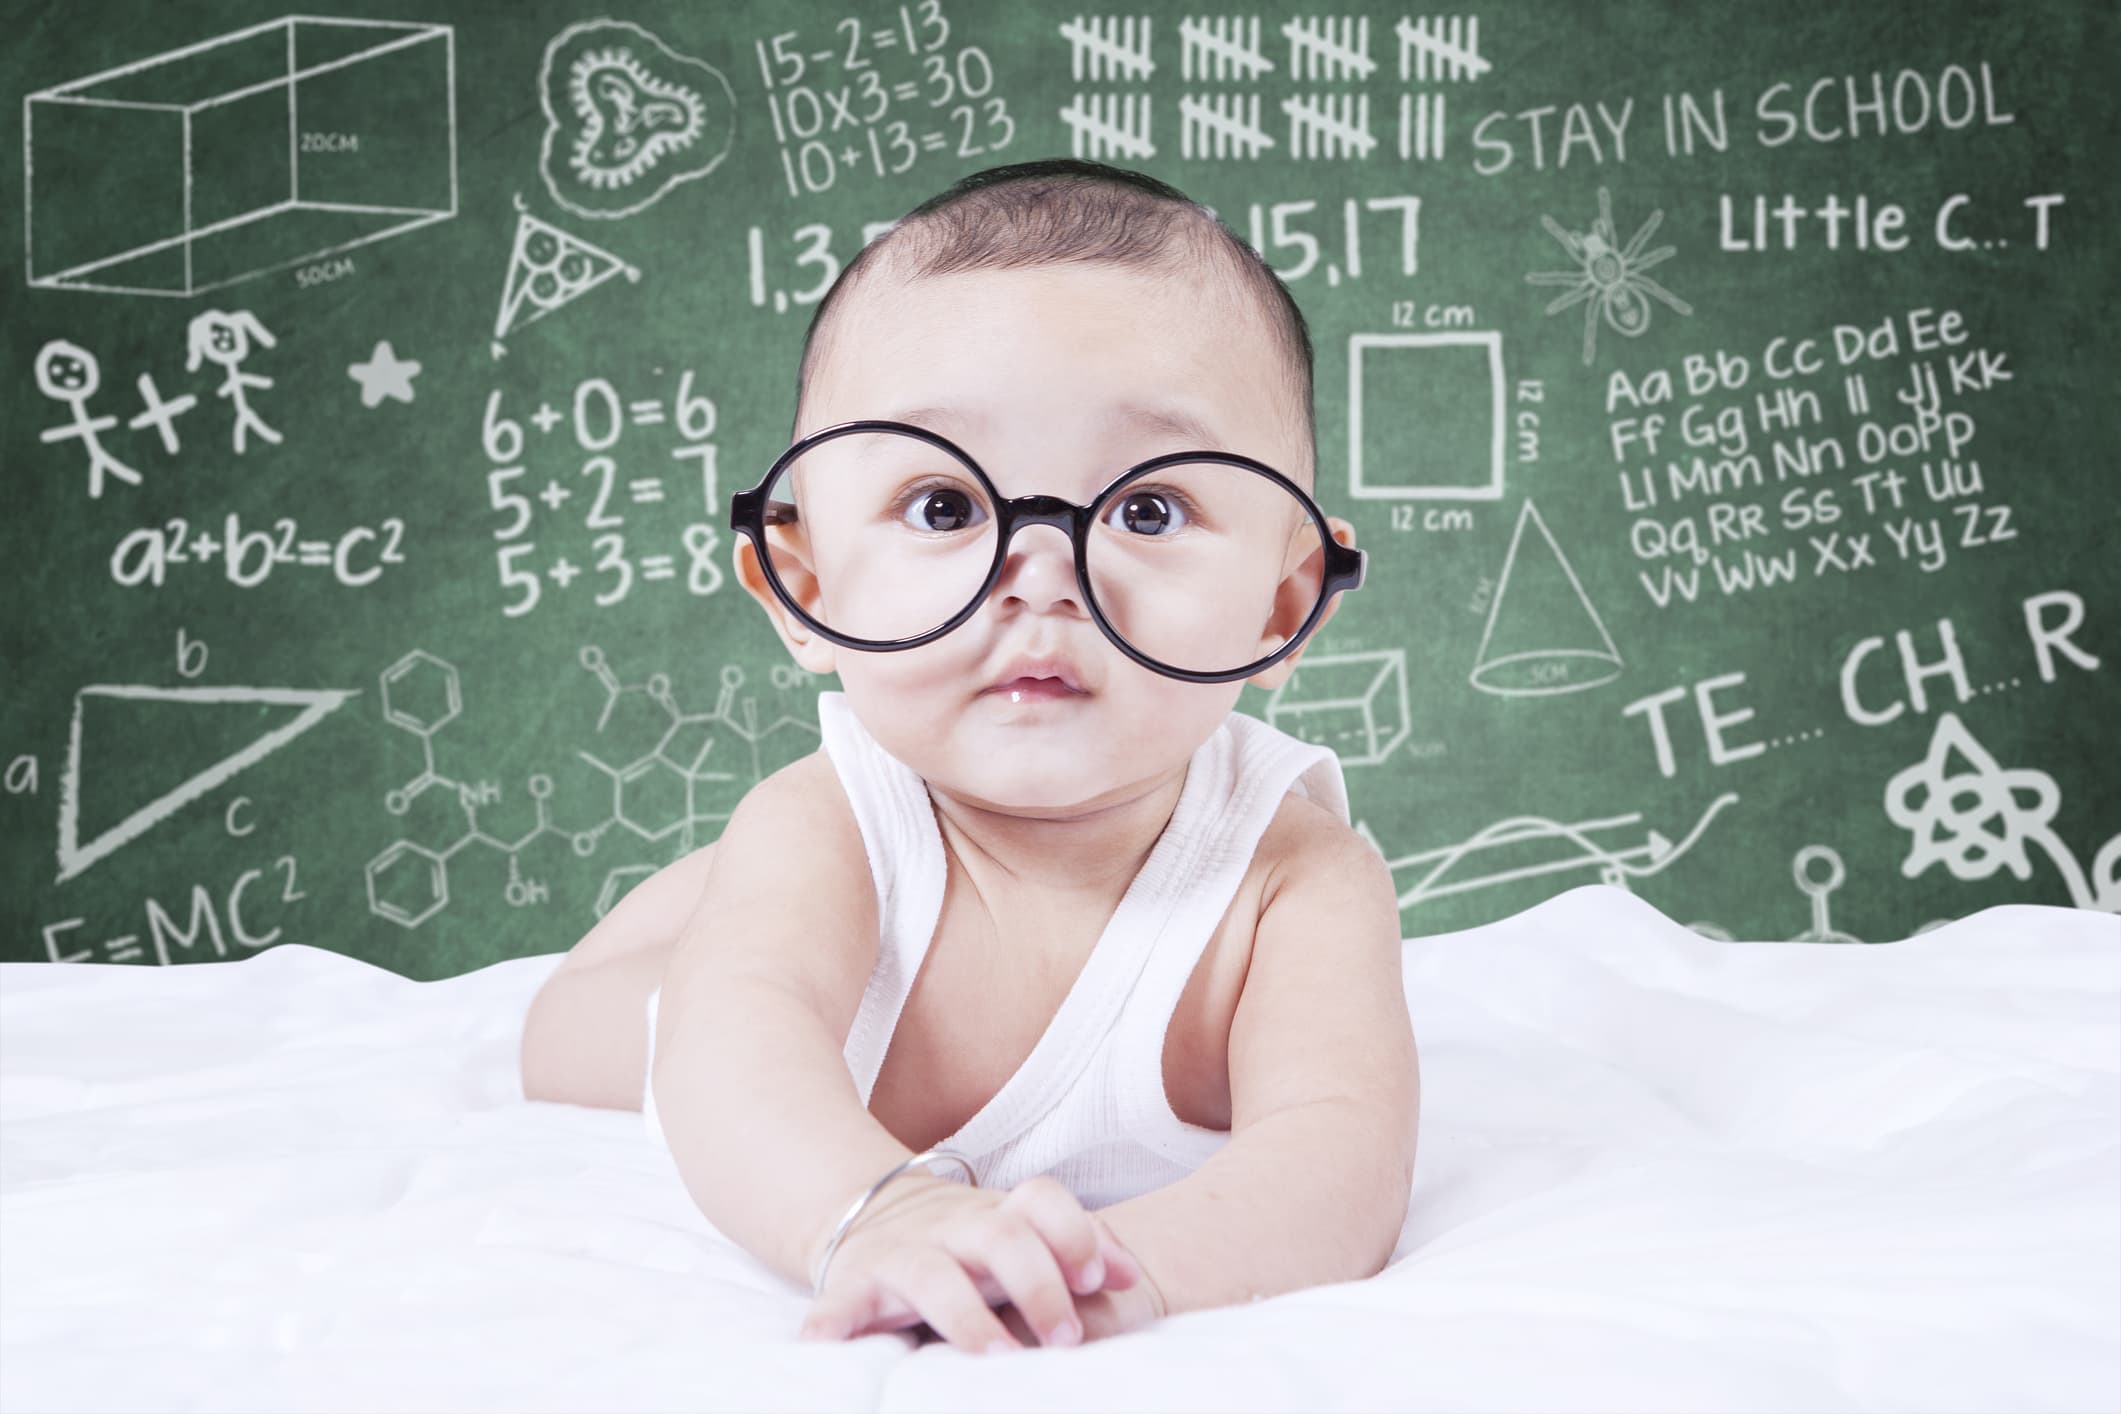 Cute male baby looking on the camera while wearing glasses, shot with a doodles background on the blackboard